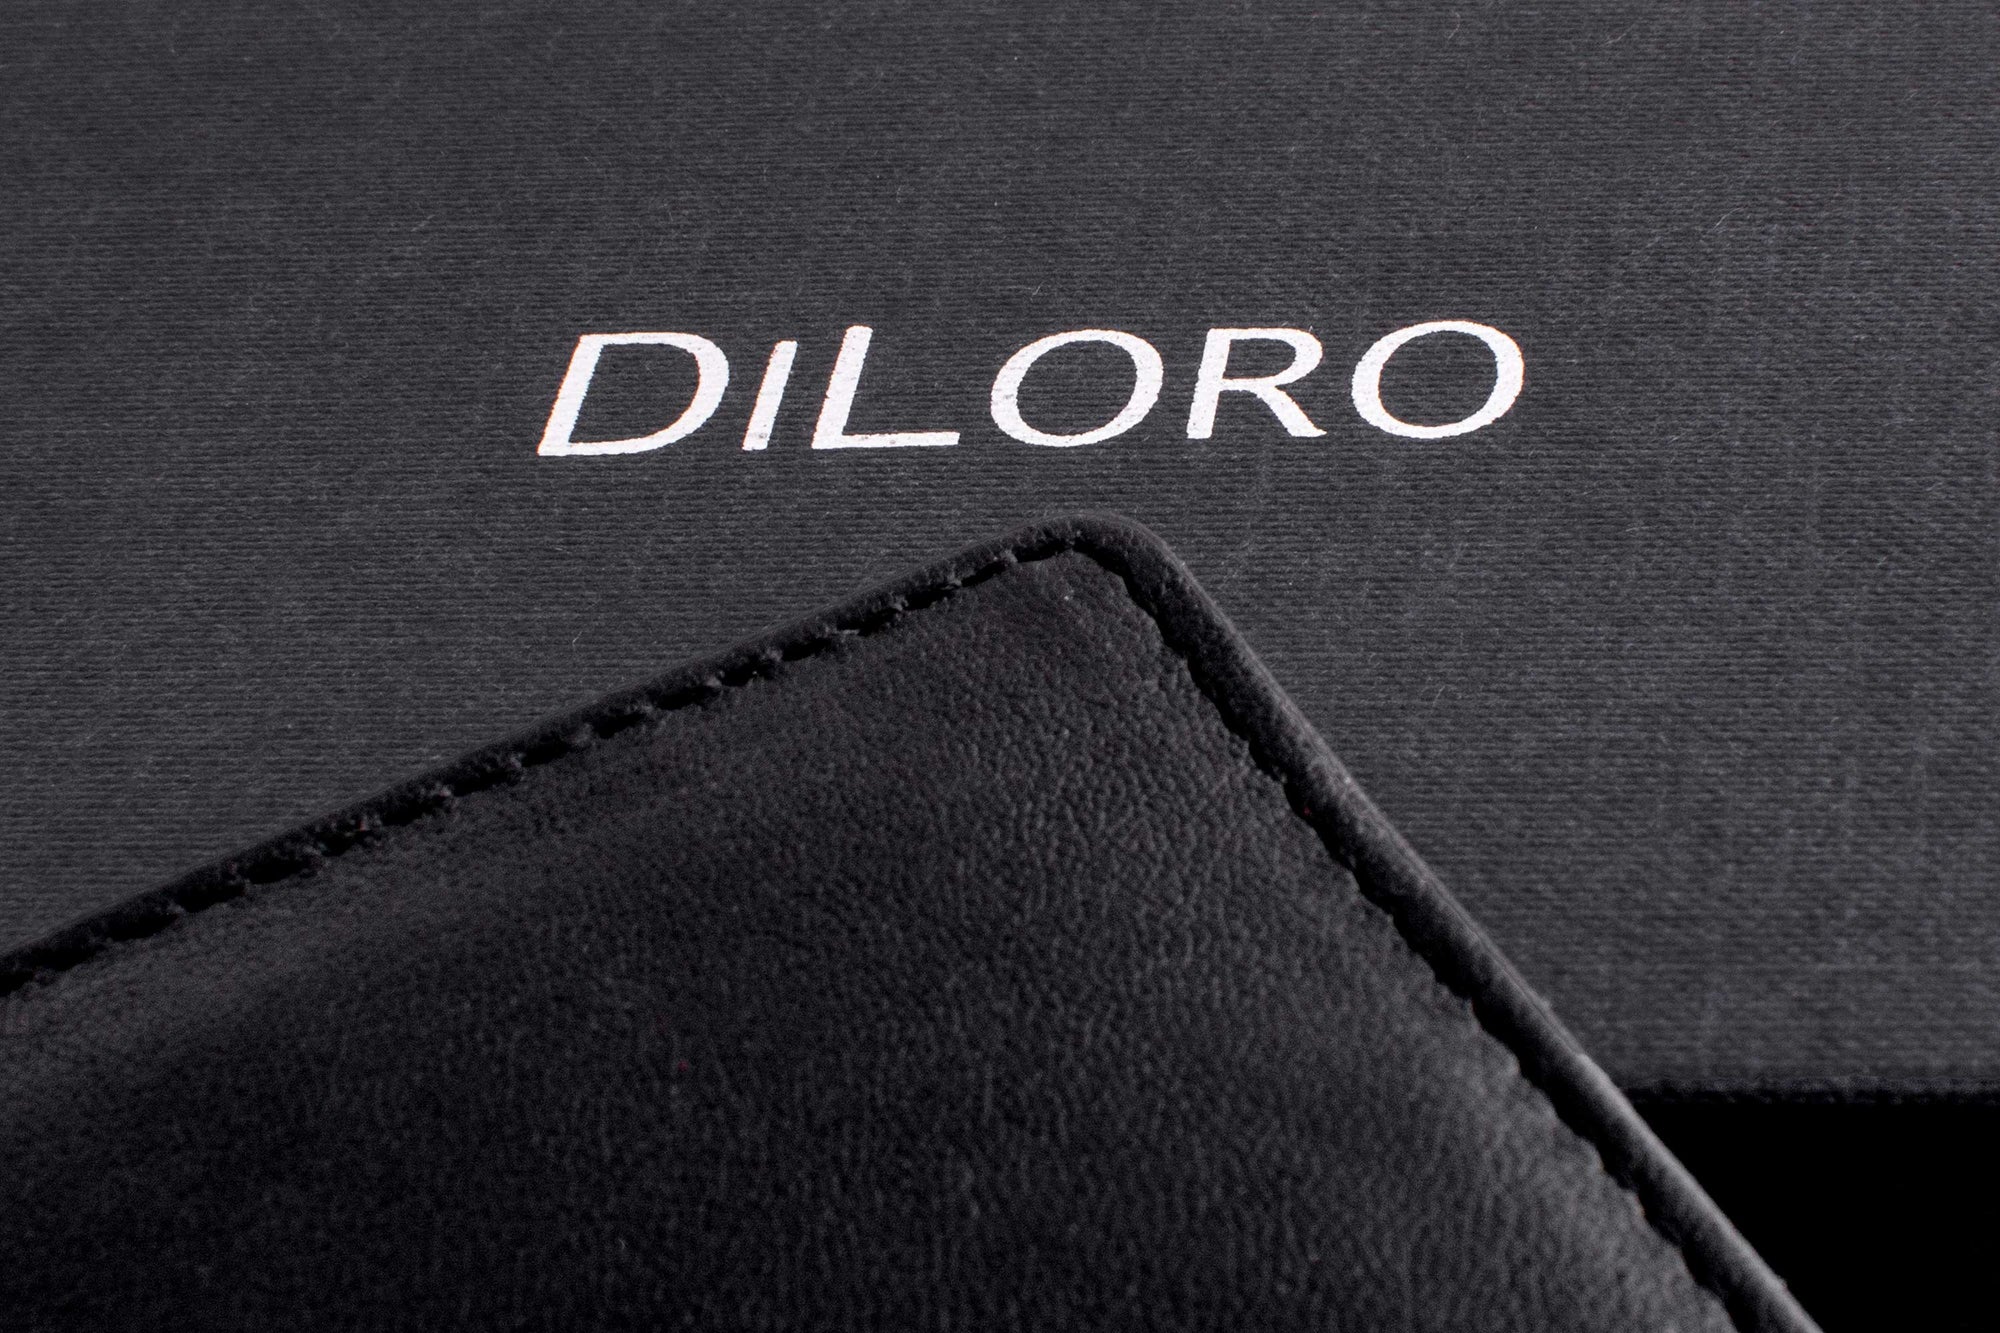 DiLoro Italy Men's Leather Wallet RFID Blocking Genuine Full Grain Leather Bifold Flip Coin Wallet with RFID Blocking Technology to Protect your from Identity Theft